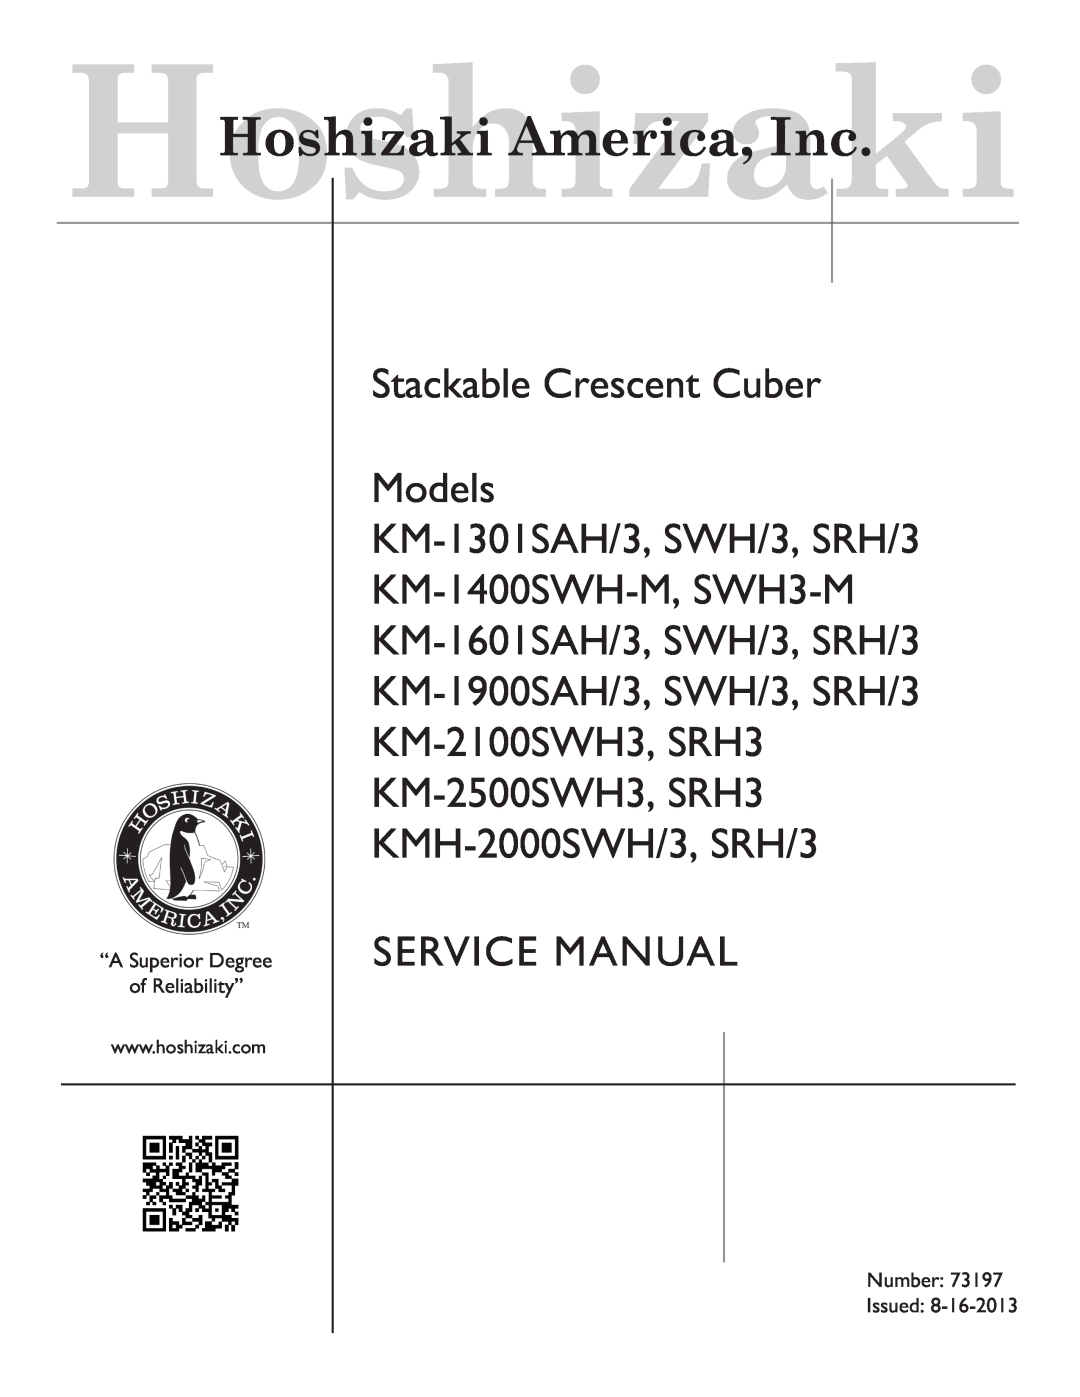 Hoshizaki SRH/3 KM-2100SWH3, SRH/3 KM-1400SWH-M, SWH/3 service manual Stackable Crescent Cuber Models, Service Manual 